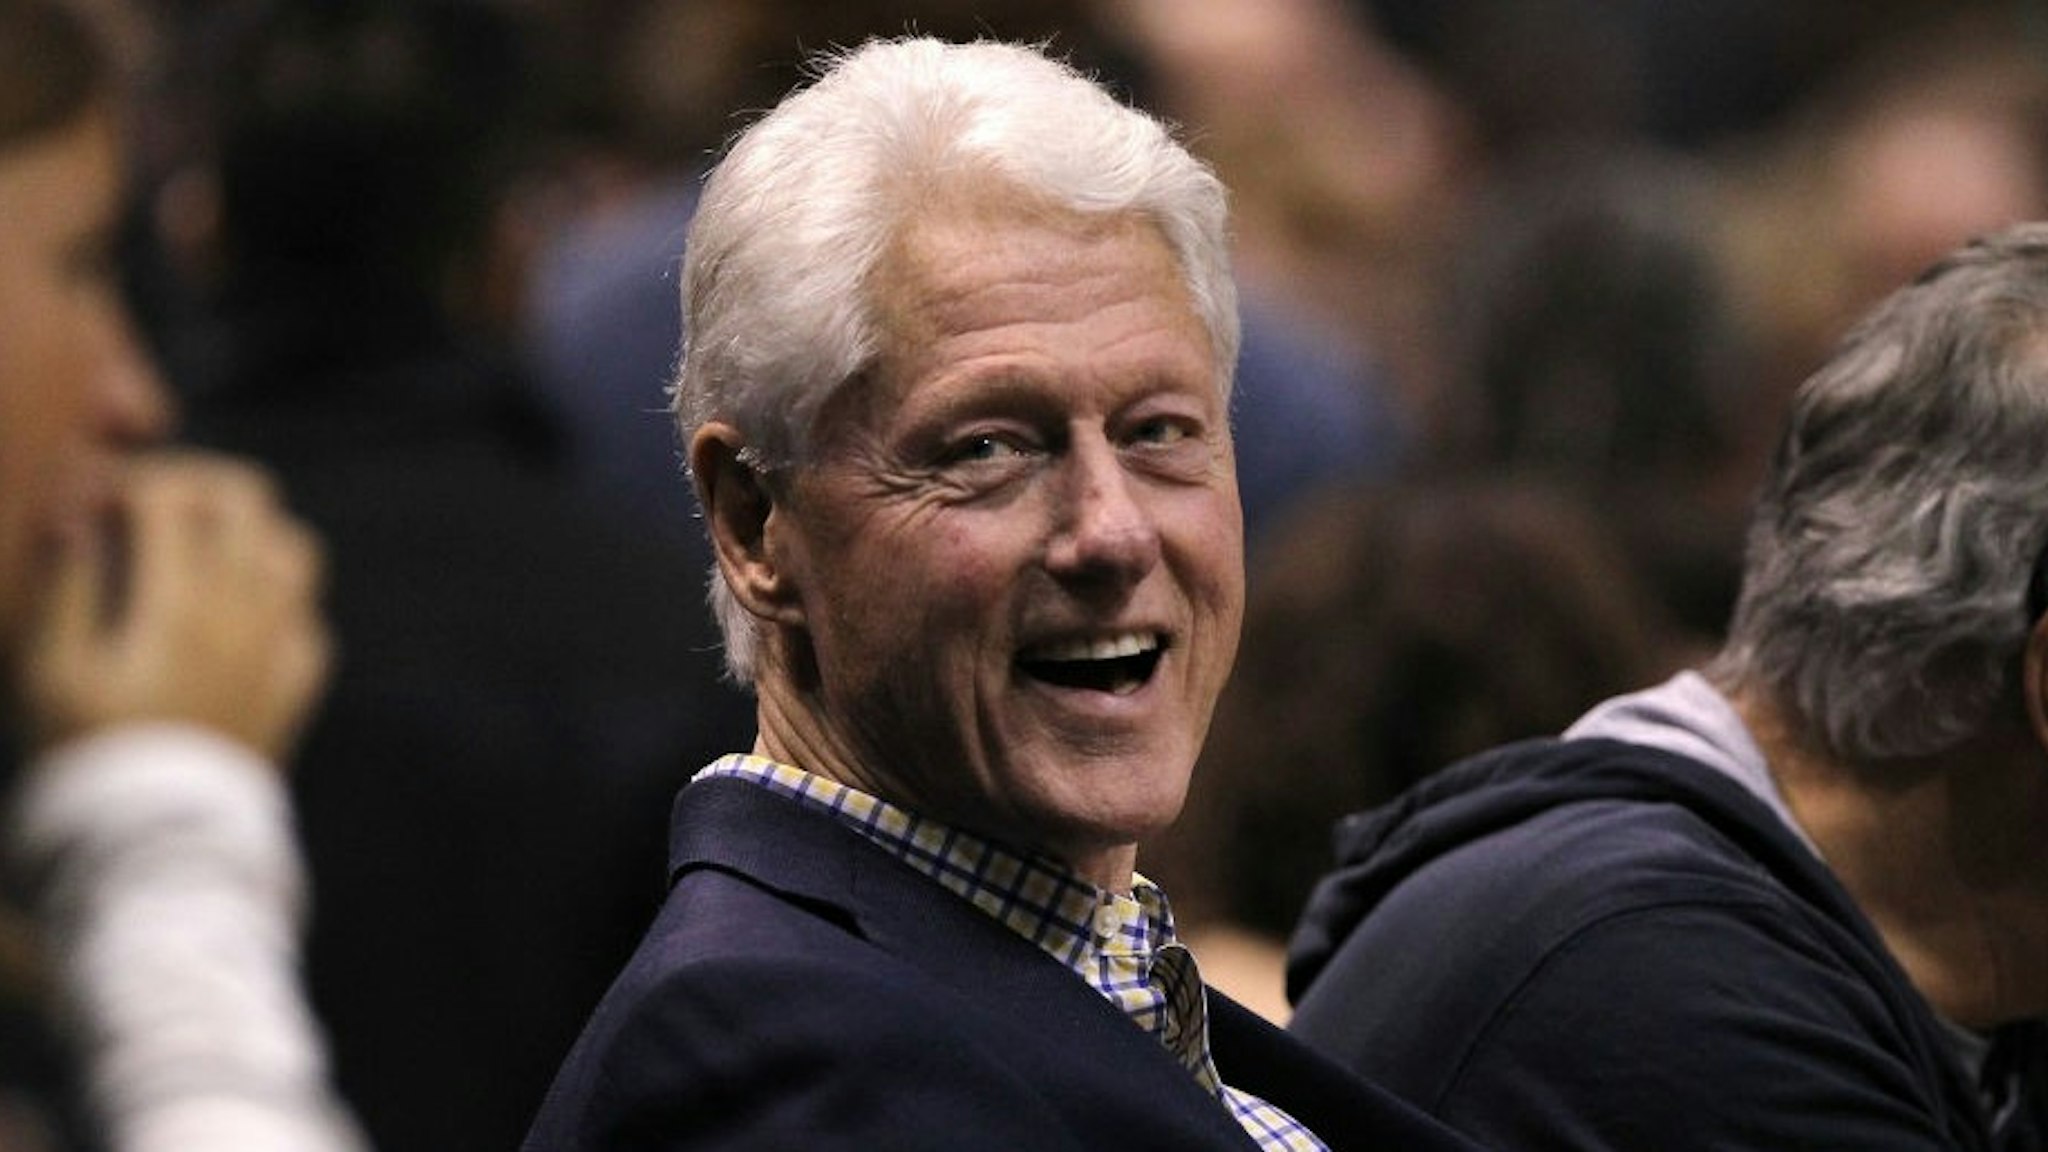 MILWAUKEE, WI - APRIL 26: Former President of the United States Bill Clinton looks on during Game Six of Round One of the 2018 NBA Playoffs between the Milwaukee Bucks and Boston Celtics at the Bradley Center on April 26, 2018 in Milwaukee, Wisconsin. NOTE TO USER: User expressly acknowledges and agrees that, by downloading and or using this photograph, User is consenting to the terms and conditions of the Getty Images License Agreement. (Photo by